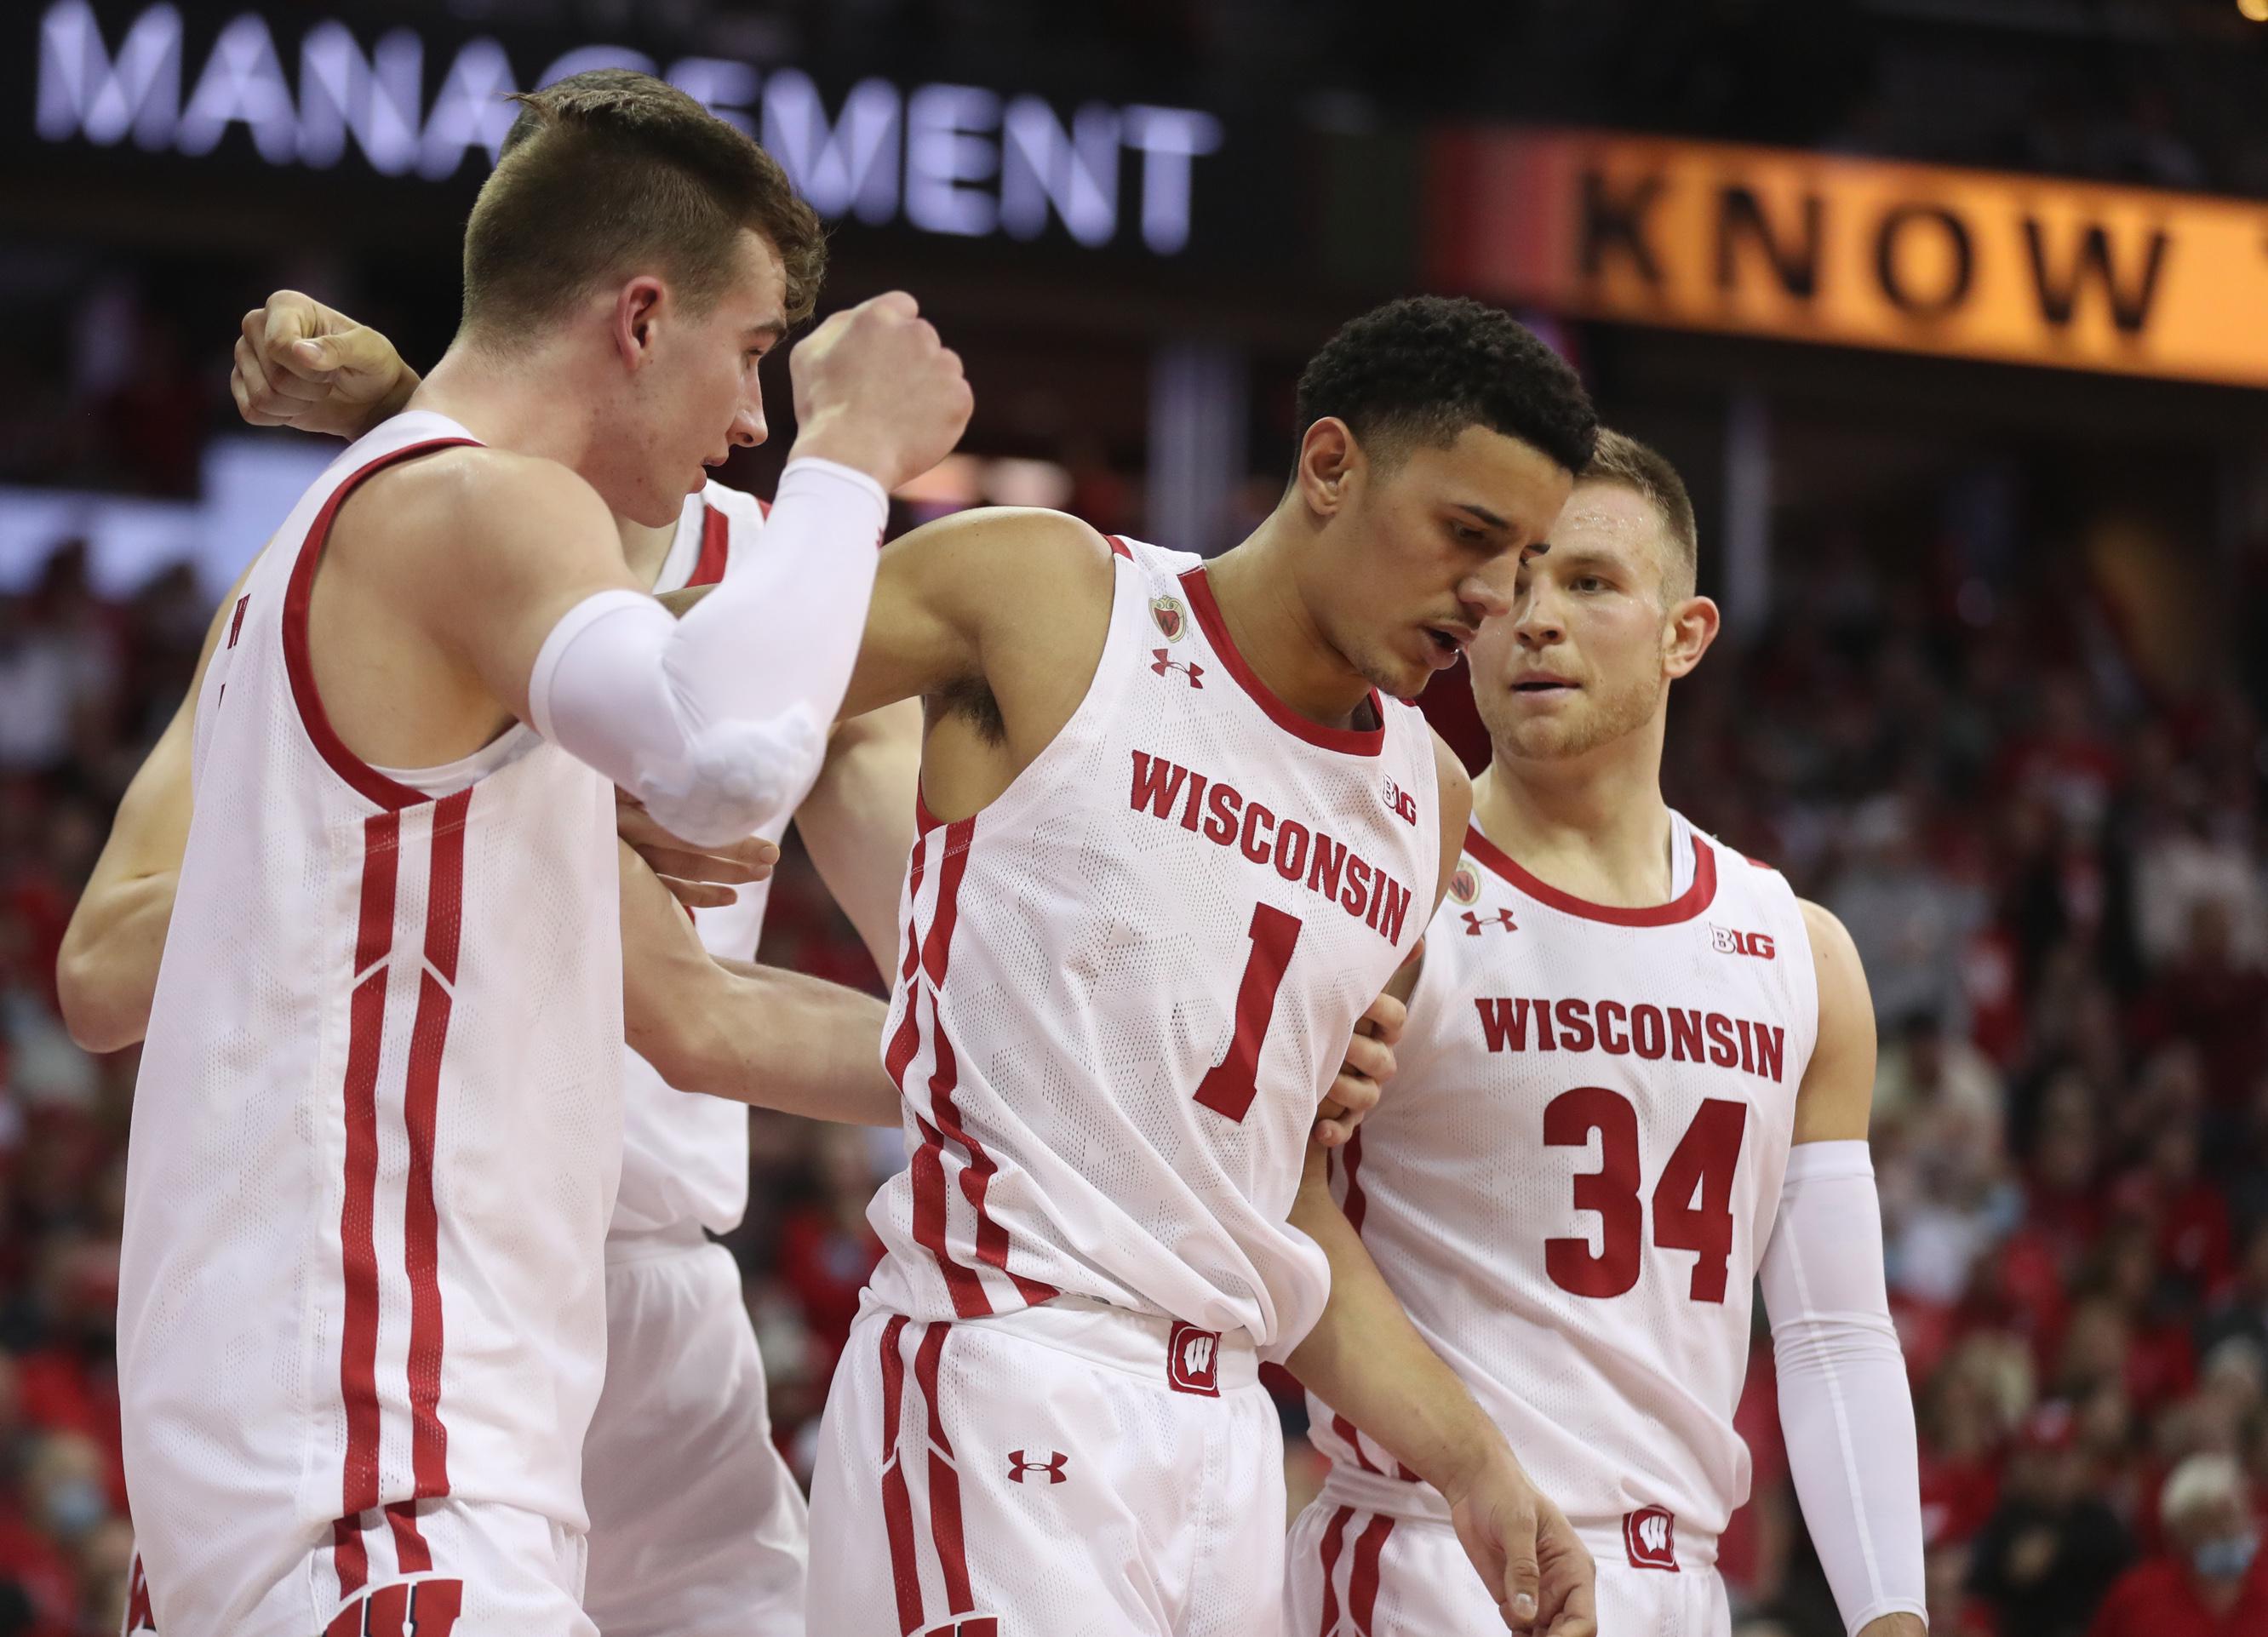 Wisconsin March Madness Schedule Next Game Time, Date, TV Channel for 2022 NCAA Basketball Tournament FanDuel Research